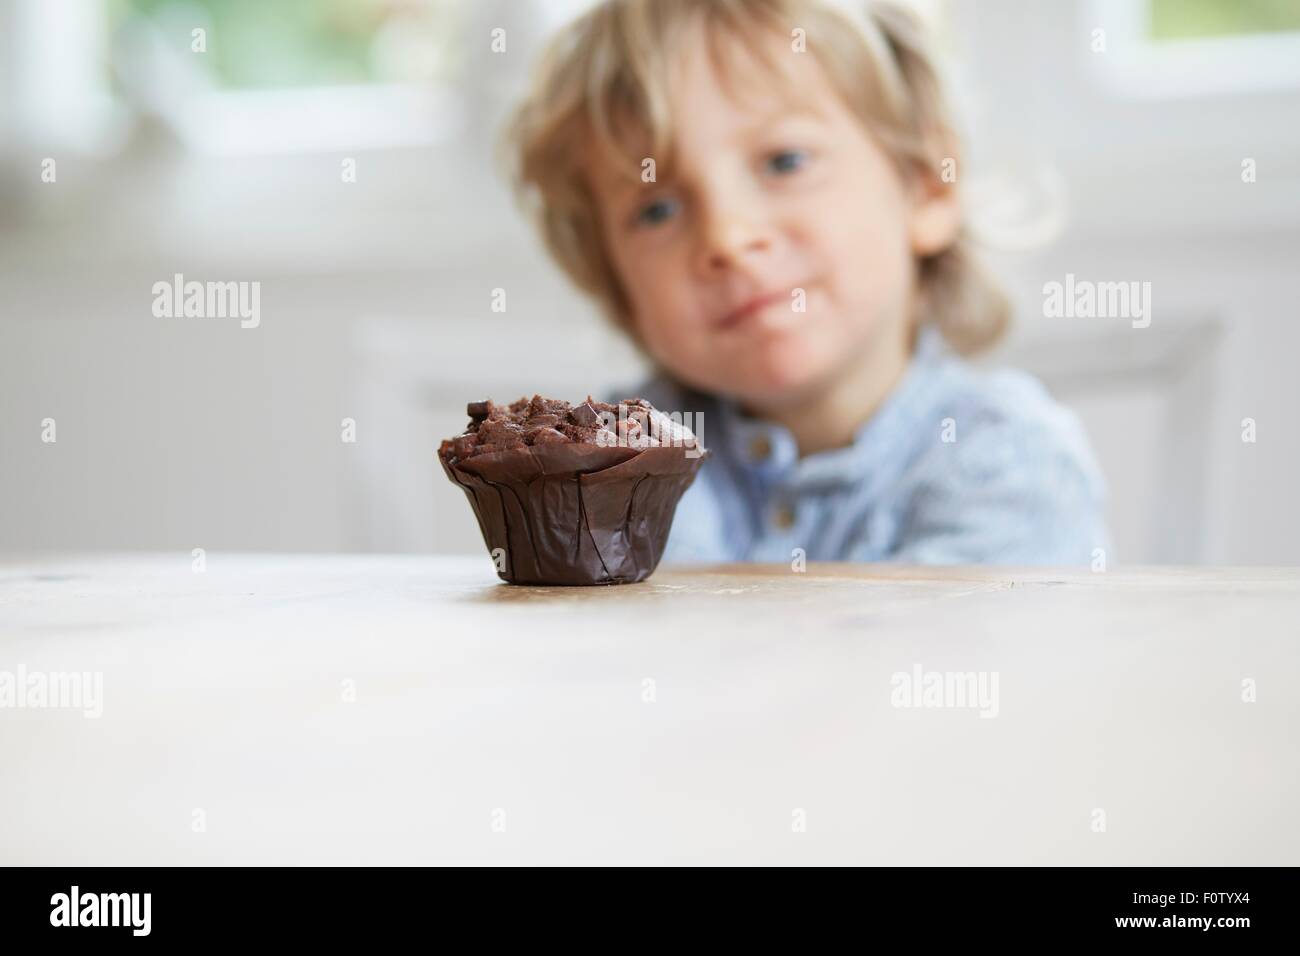 Young boy staring at chocolate muffin Stock Photo